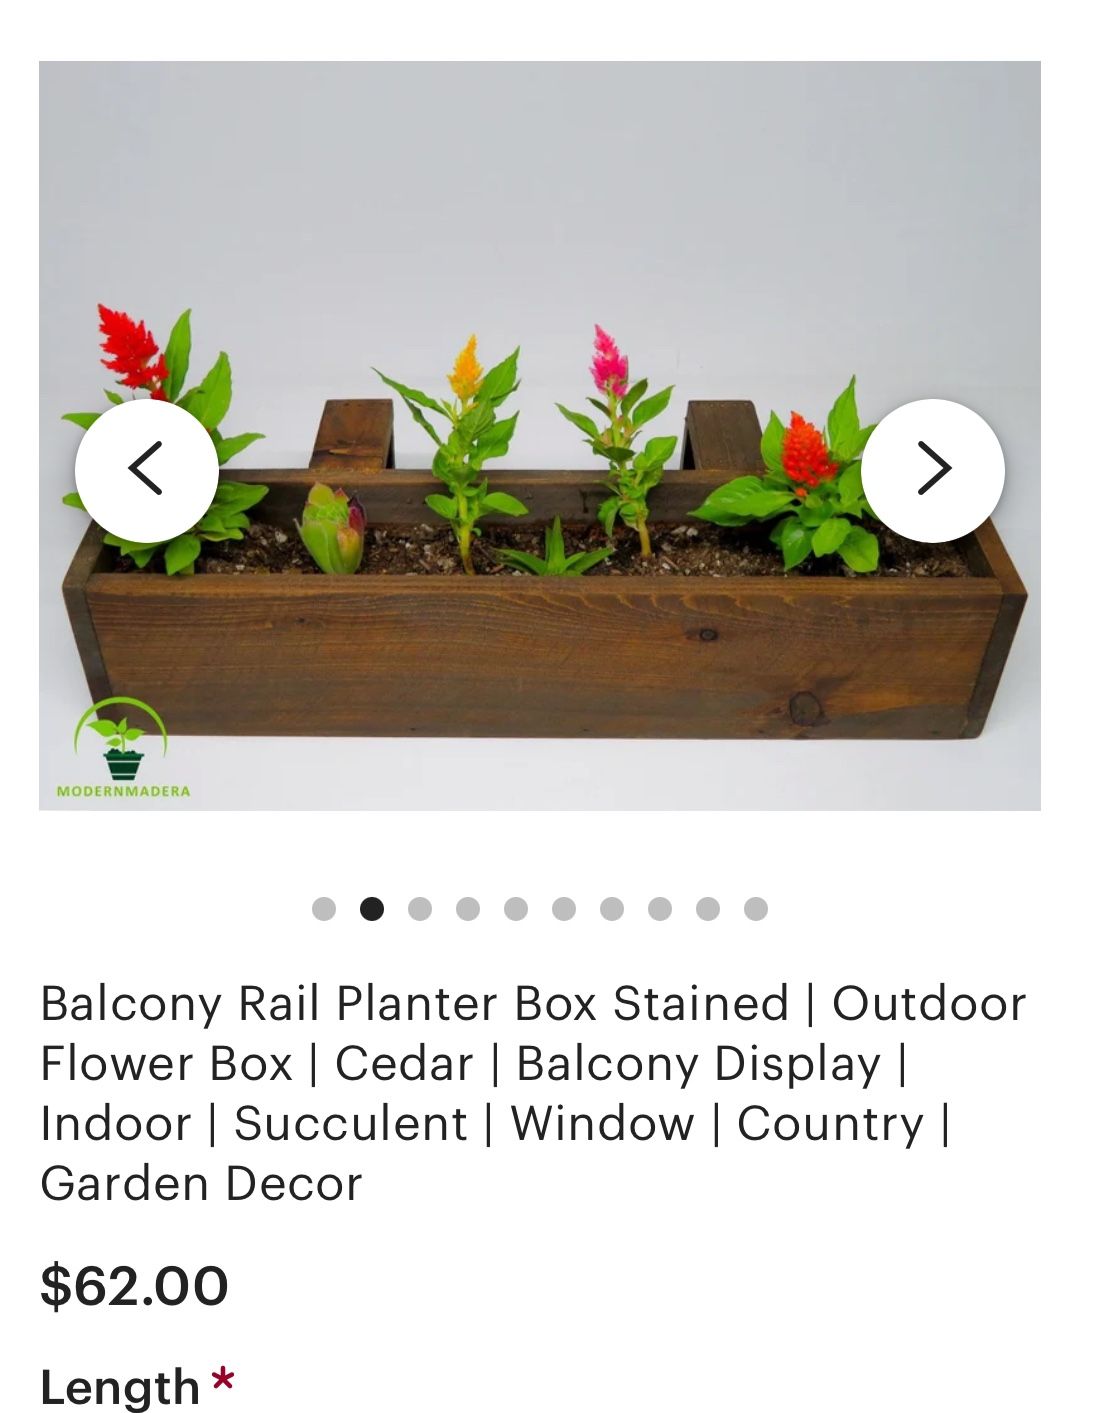 Balcony Rail Planter Box Stained | Outdoor Flower Box